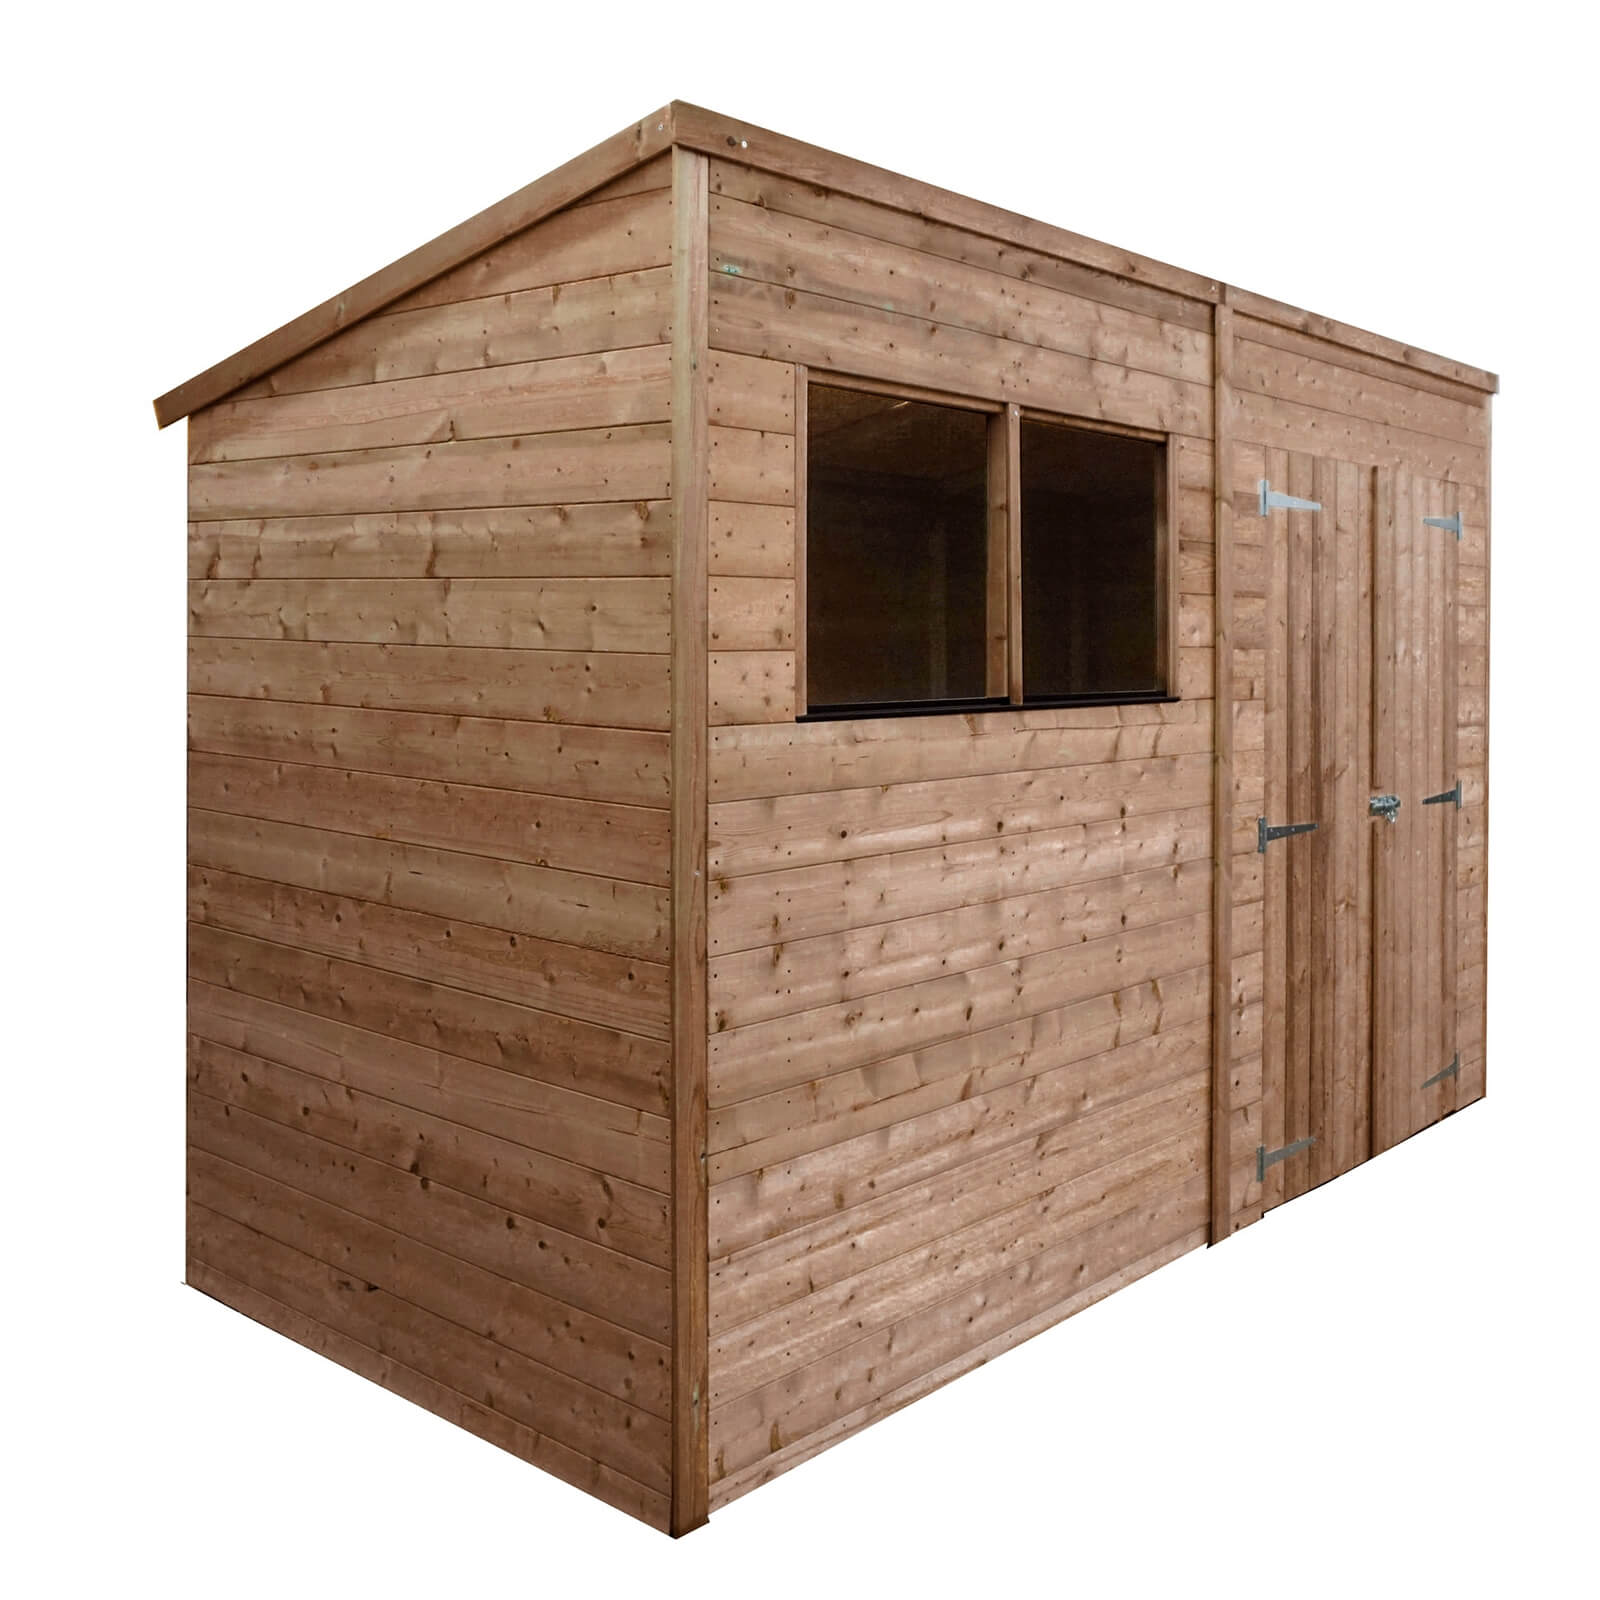 Mercia 10x6ft Pressure Treated Pent Wooden Shed